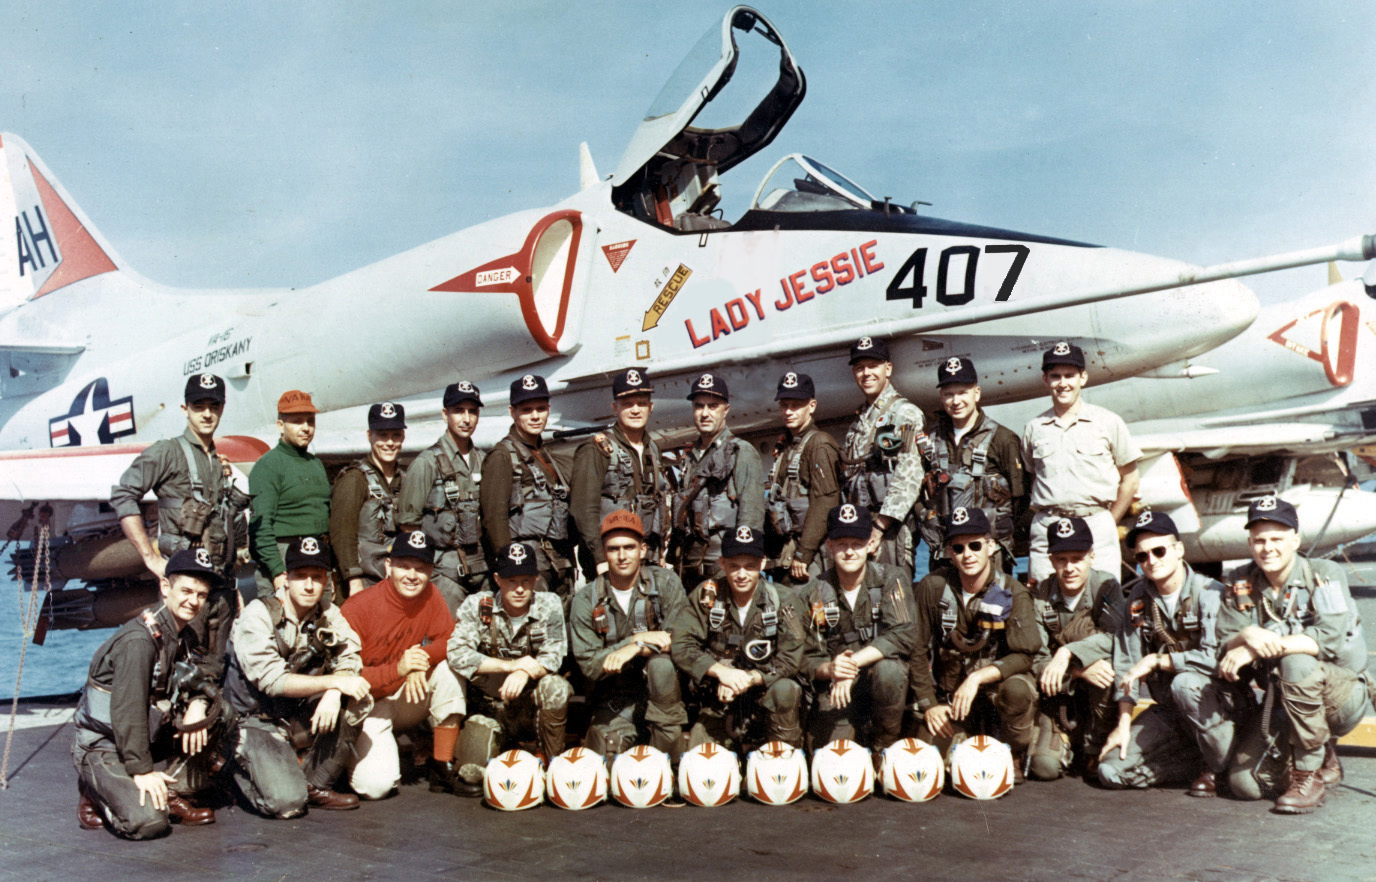 Purdy (back row, far left) and his squadron stand for a photo with the Lady Jessie, an airplane named in honor of Jessie Beck. / Courtesy Don Purdy